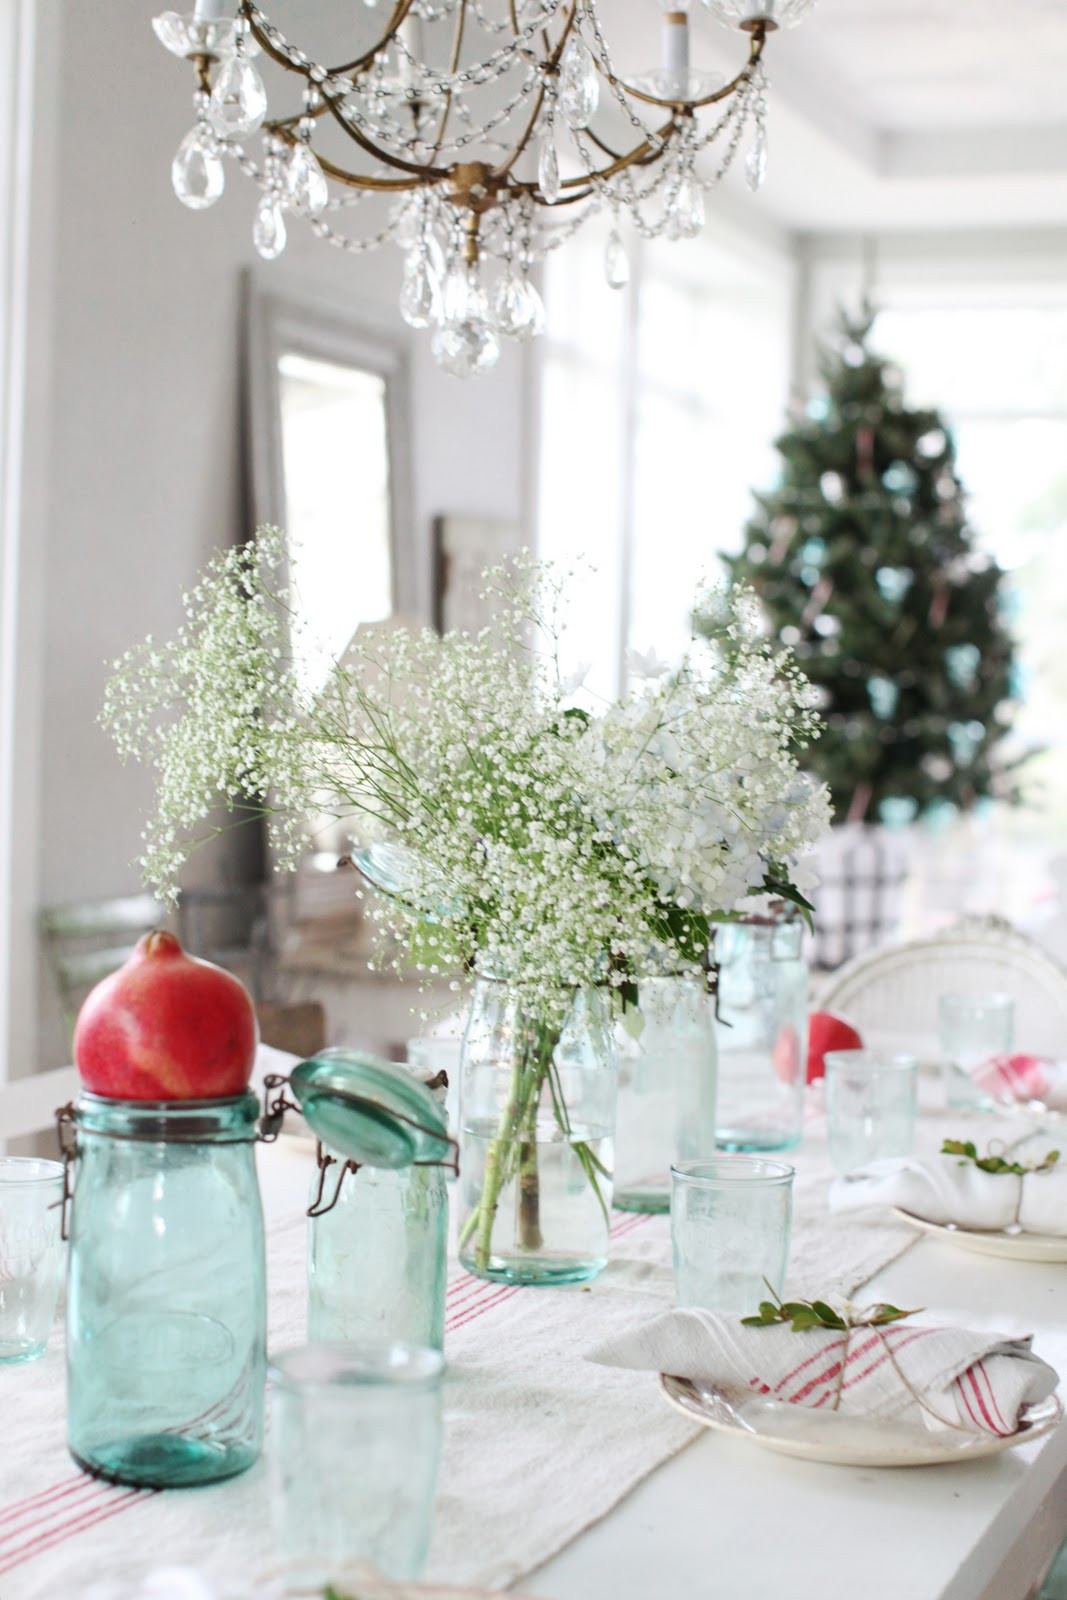 Simple Christmas Table Decorations
 Dreamy Whites A Simple Christmas Table Setting